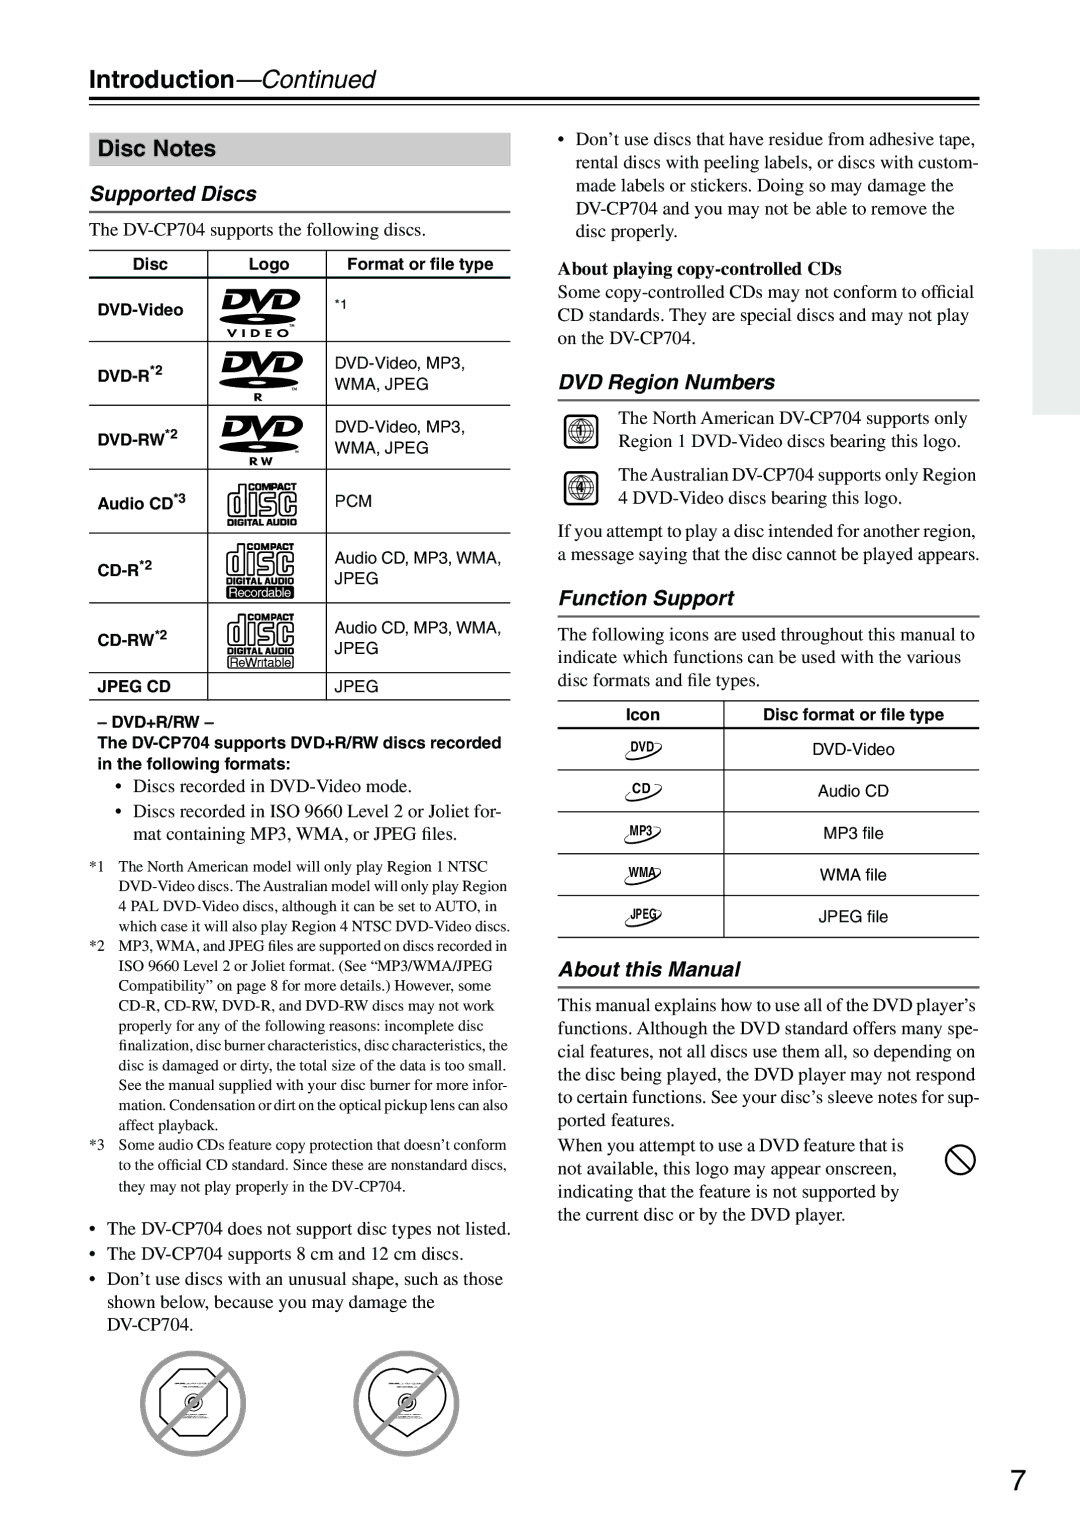 Onkyo DV-CP704S instruction manual Introduction, Disc Notes 